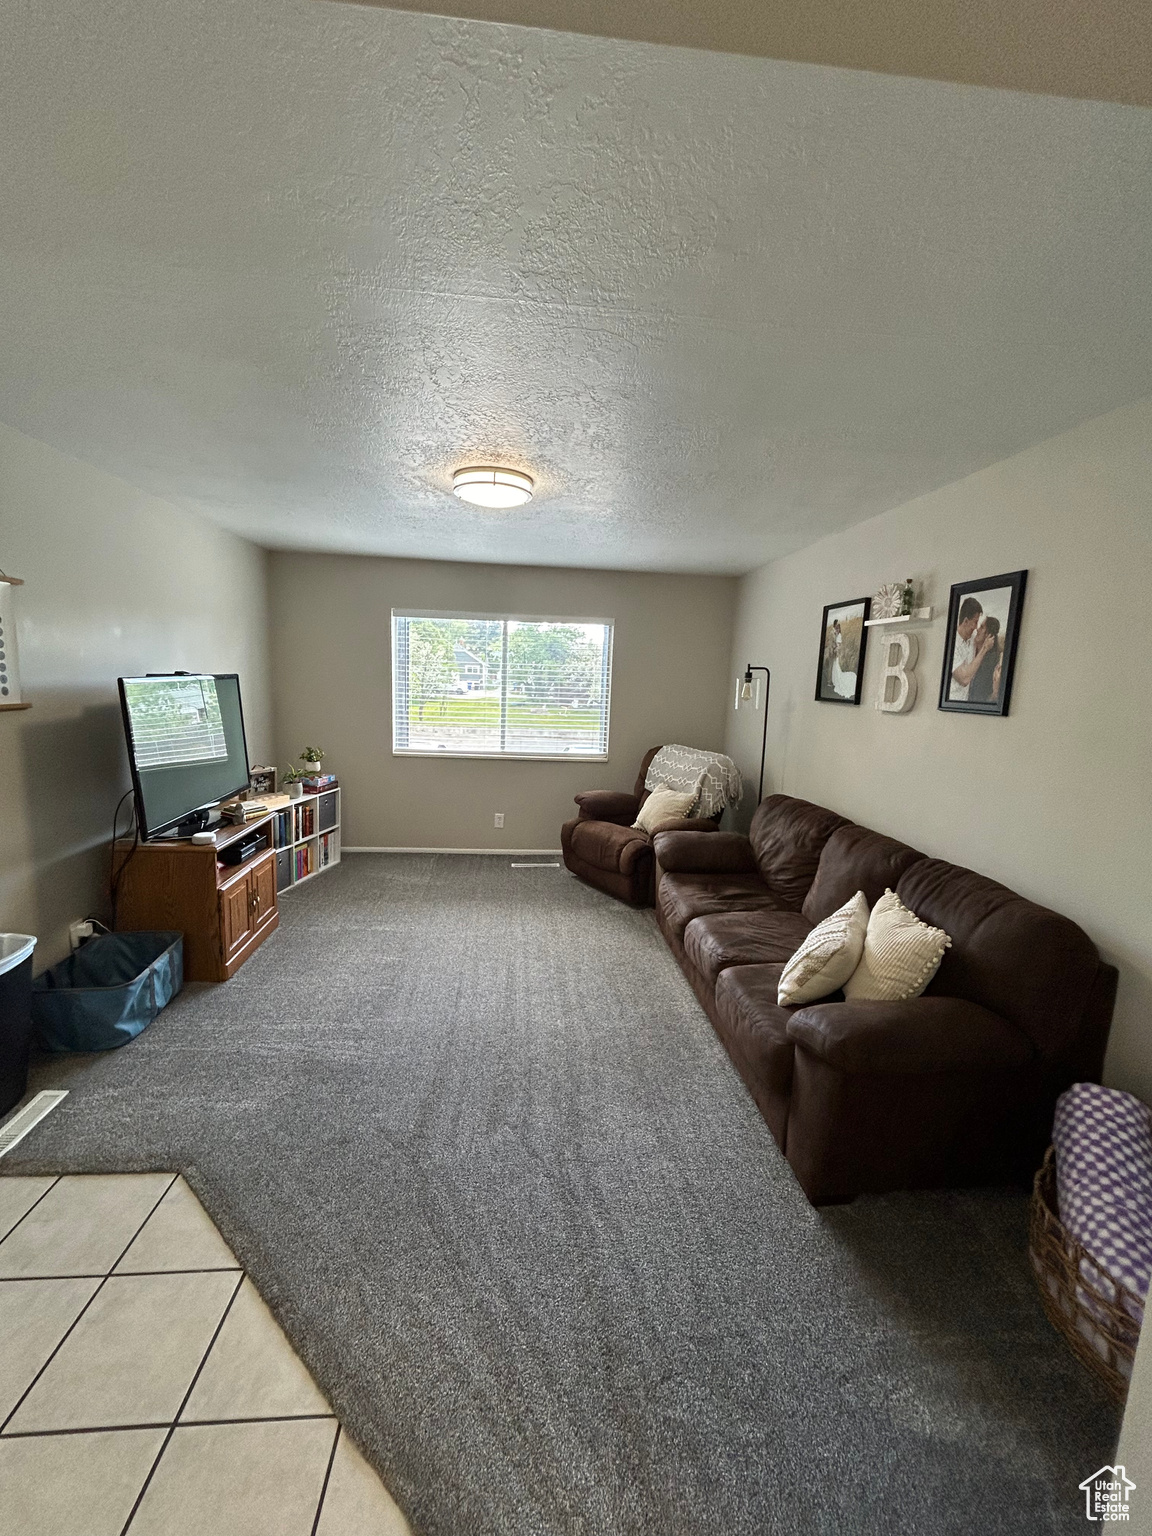 Living room with a textured ceiling and carpet